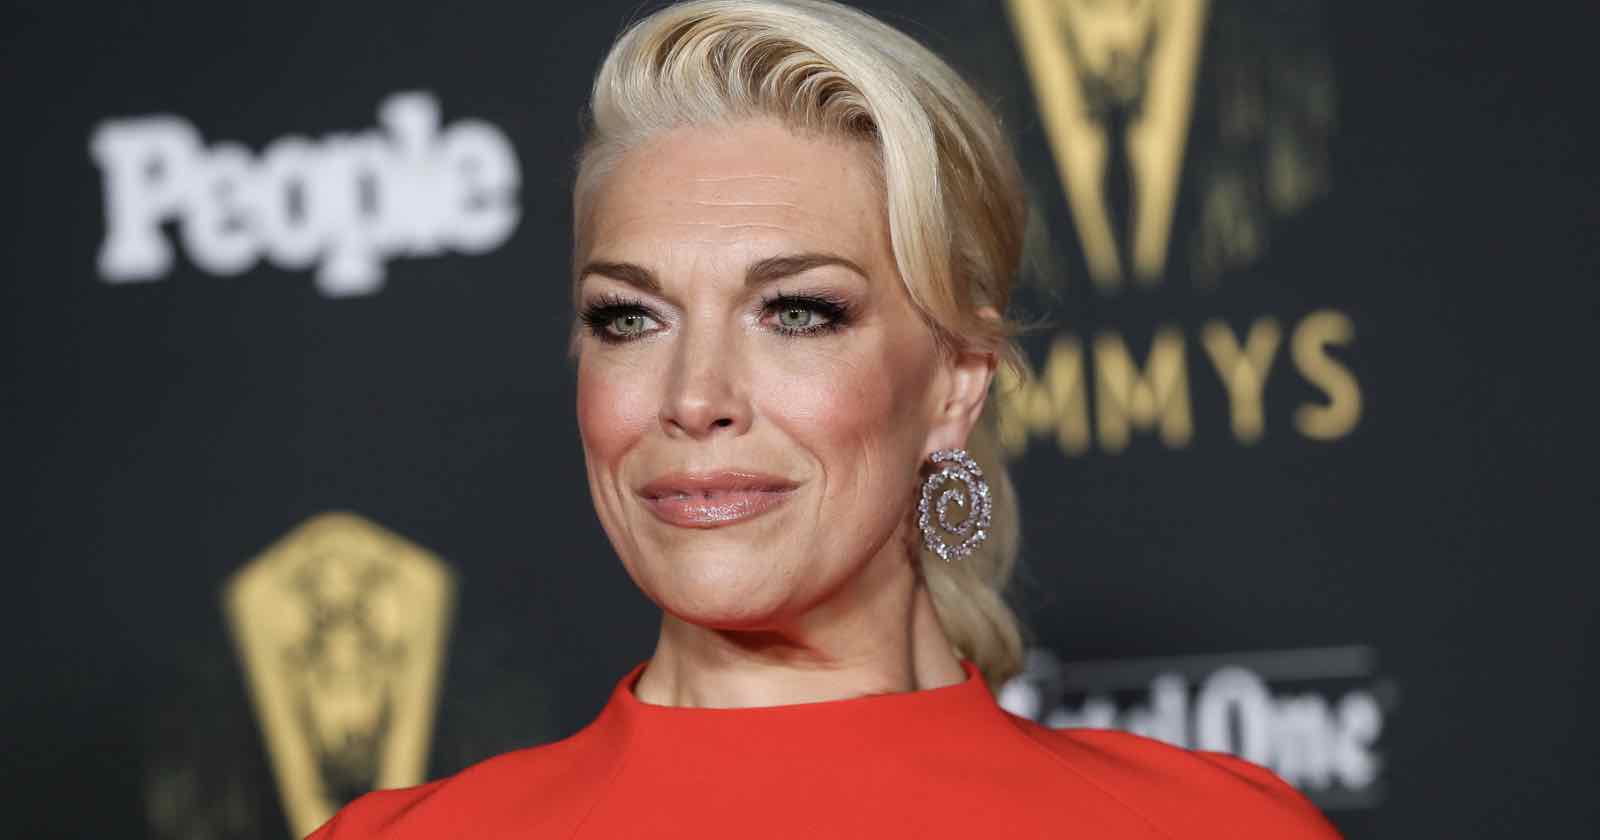  ted lasso star hannah waddingham scolds photographer who 